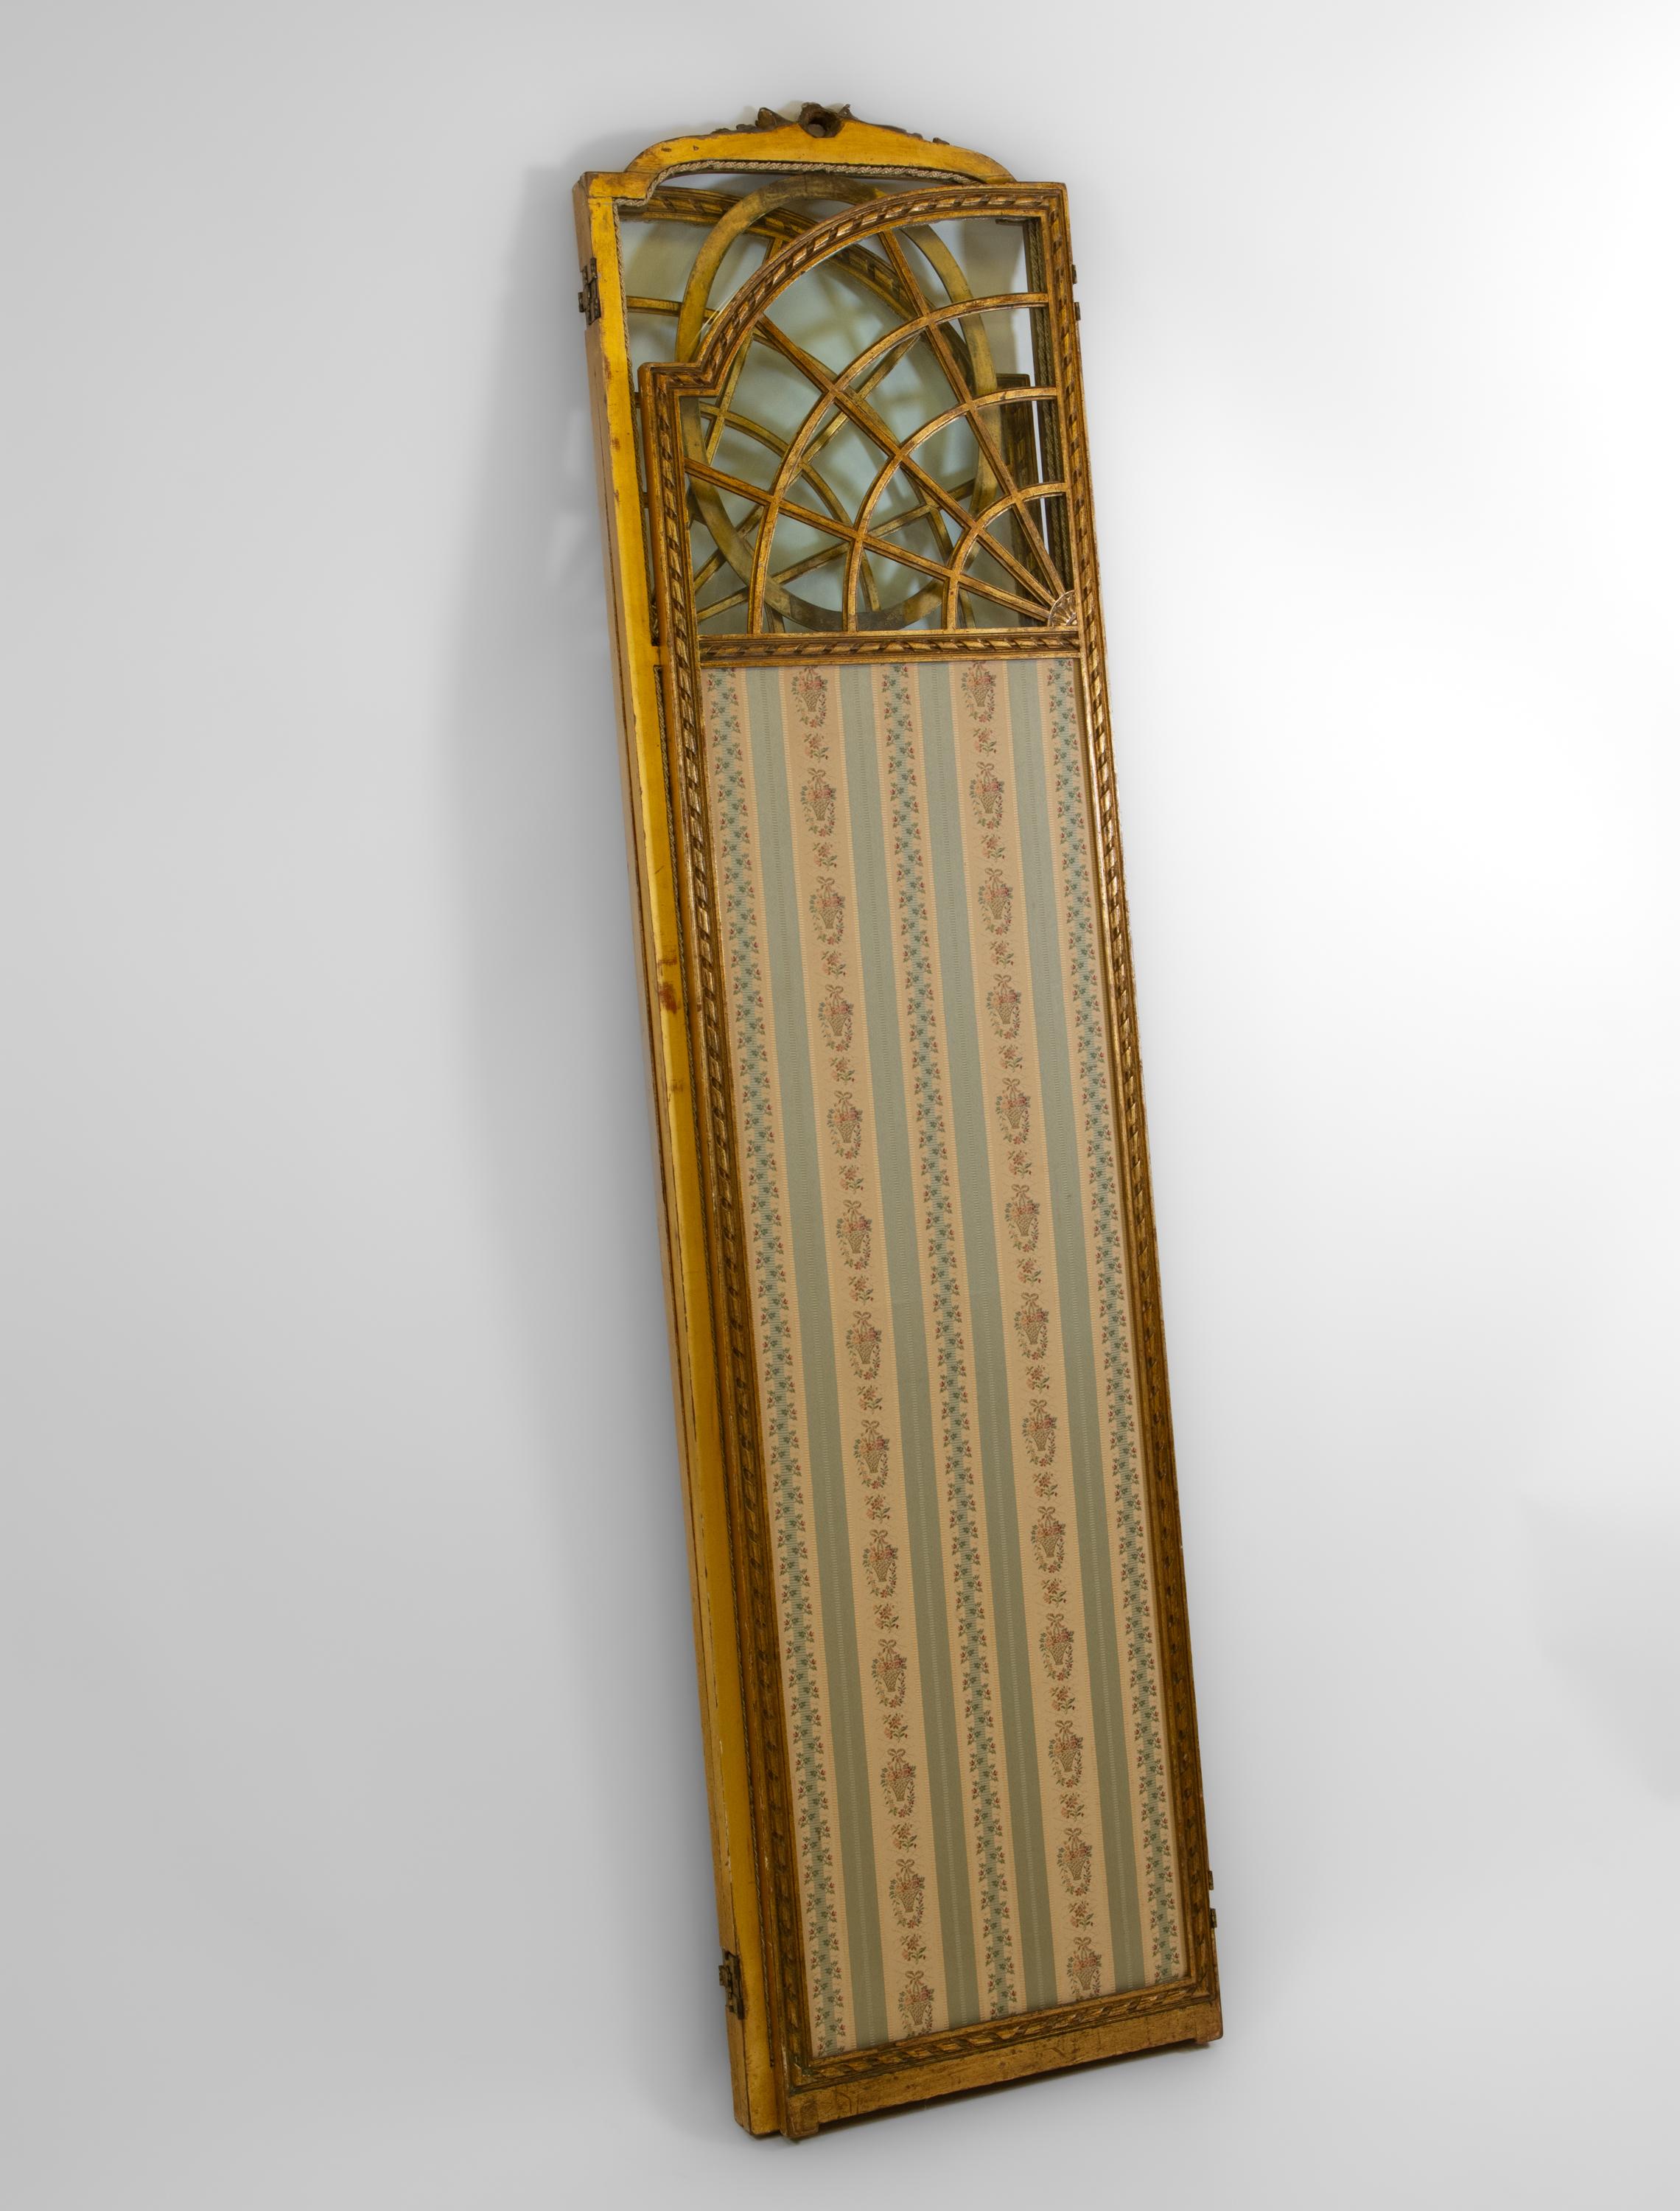 Antique English Edwardian Gilt Wood Folding Screen Room Divider In Good Condition For Sale In Norwich, GB